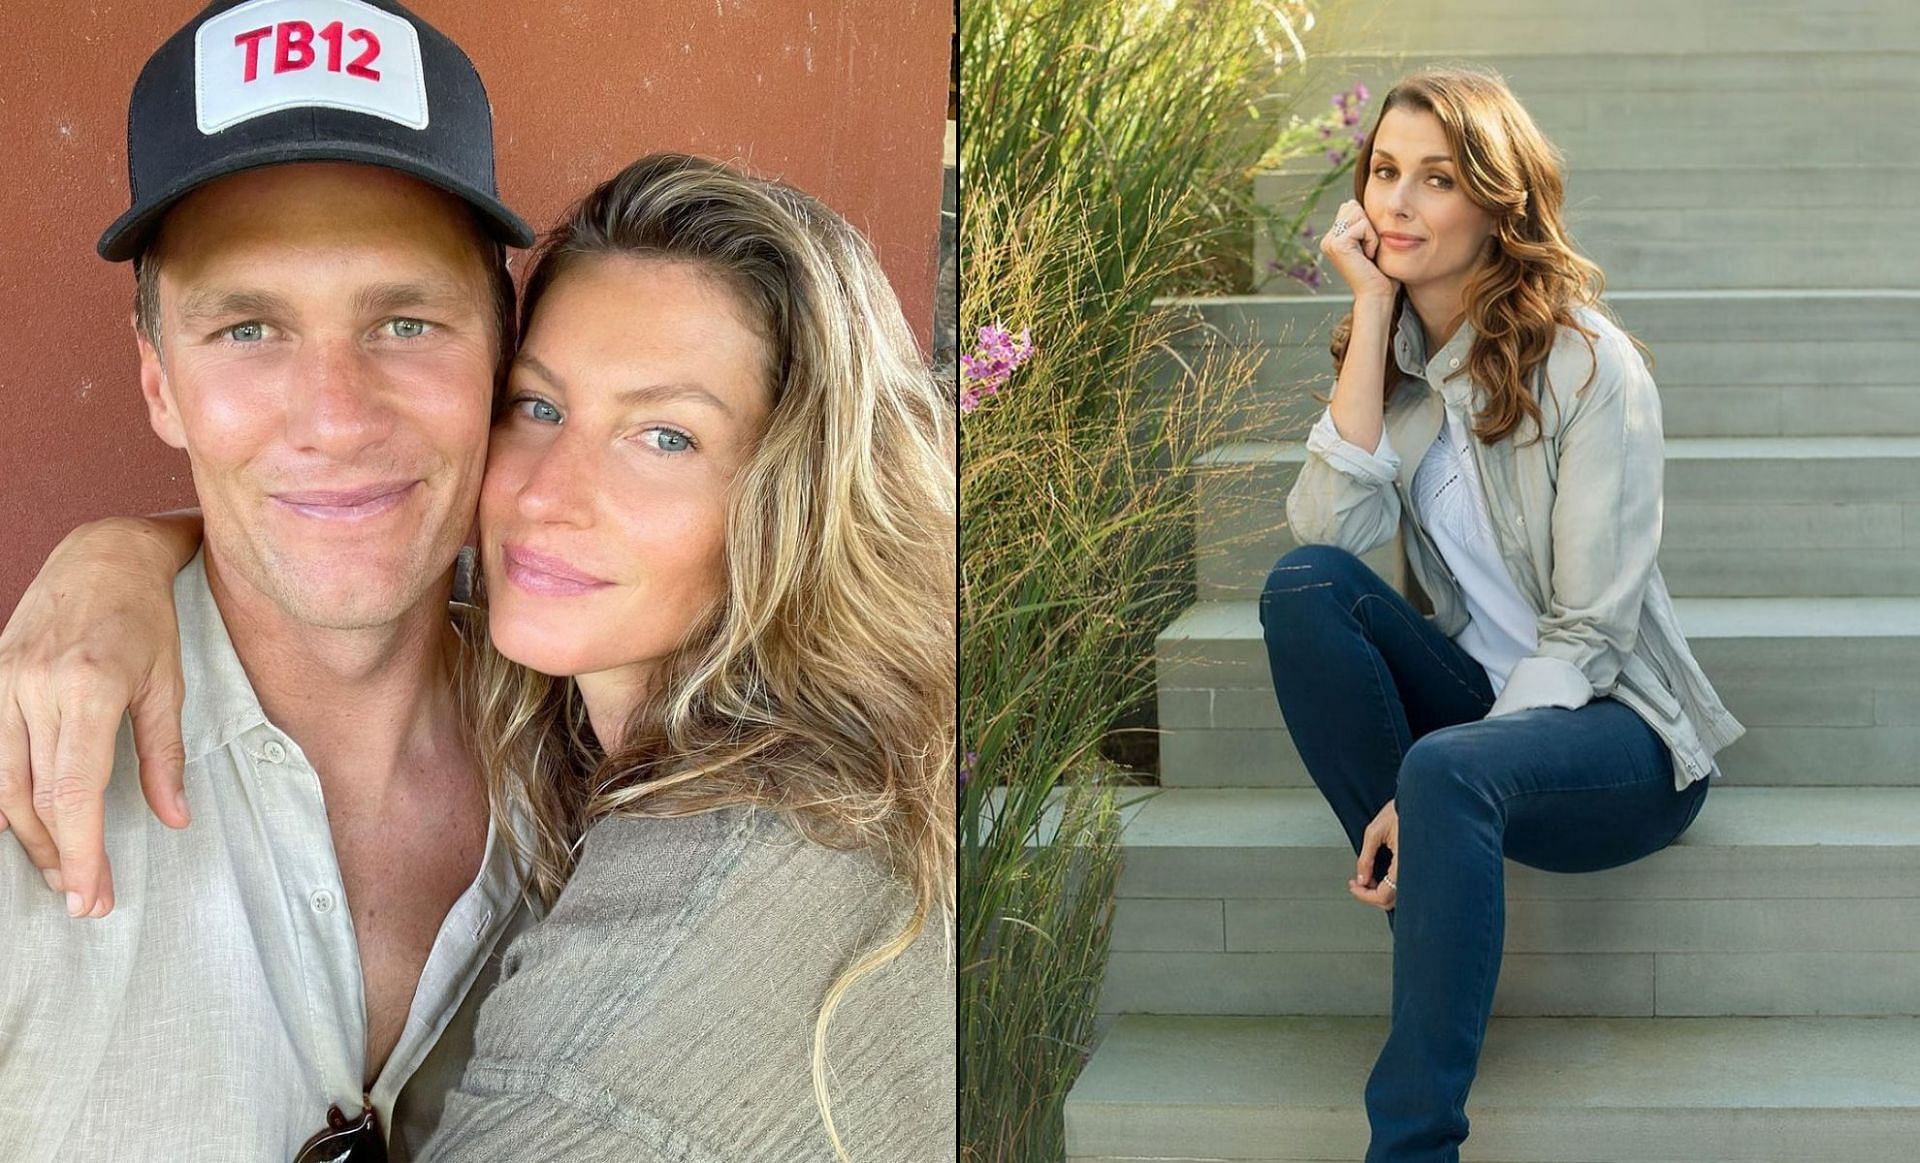 Did Gisele Bundchen want to call it quits years ago?